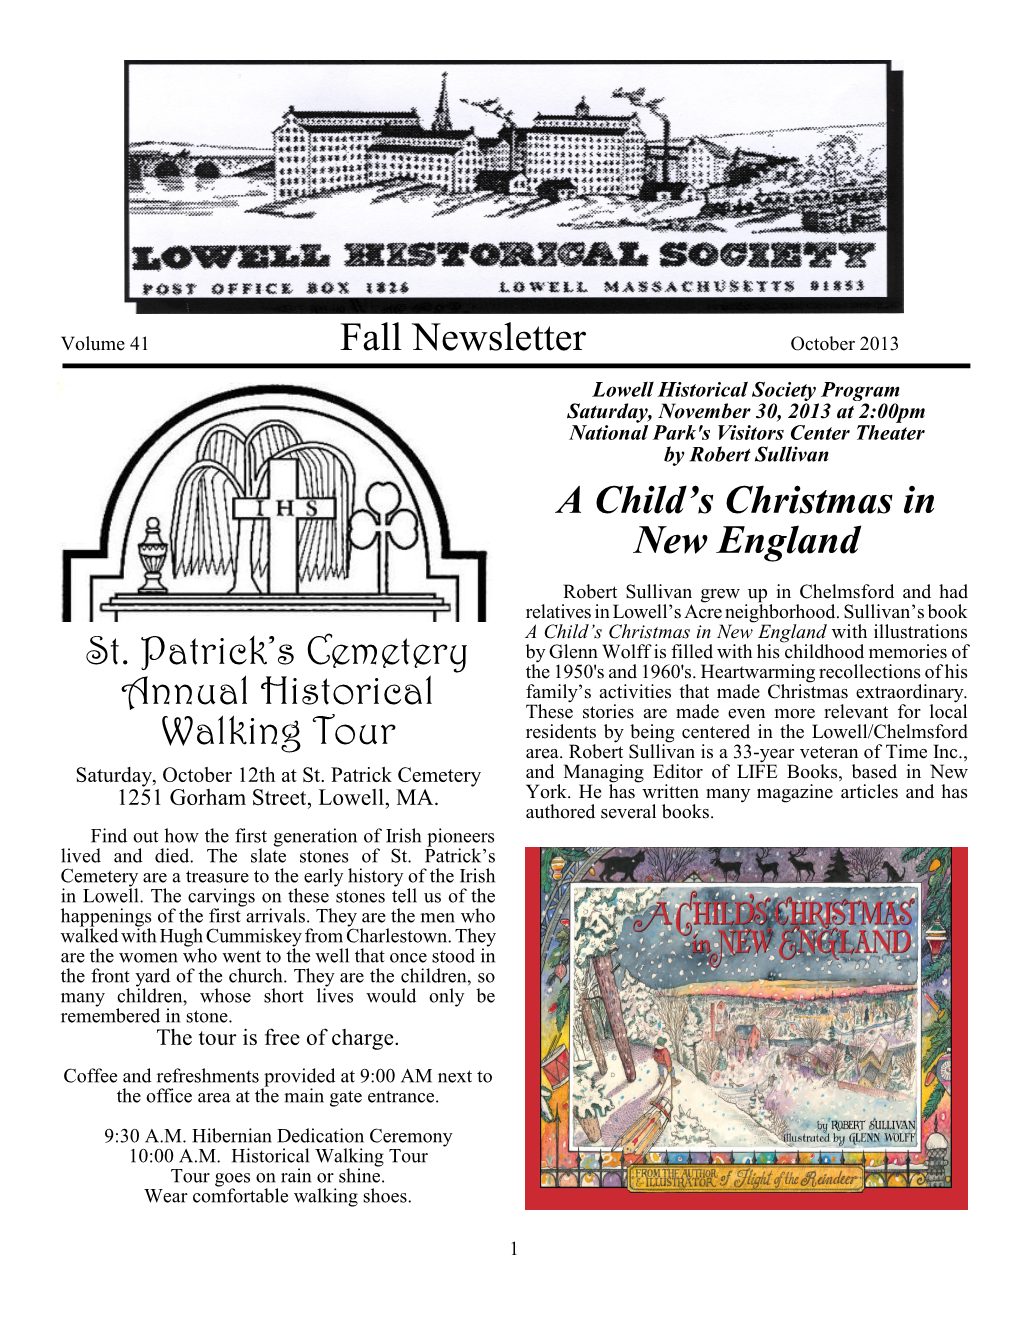 Fall Newsletter St. Patrick's Cemetery Annual Historical Walking Tour A